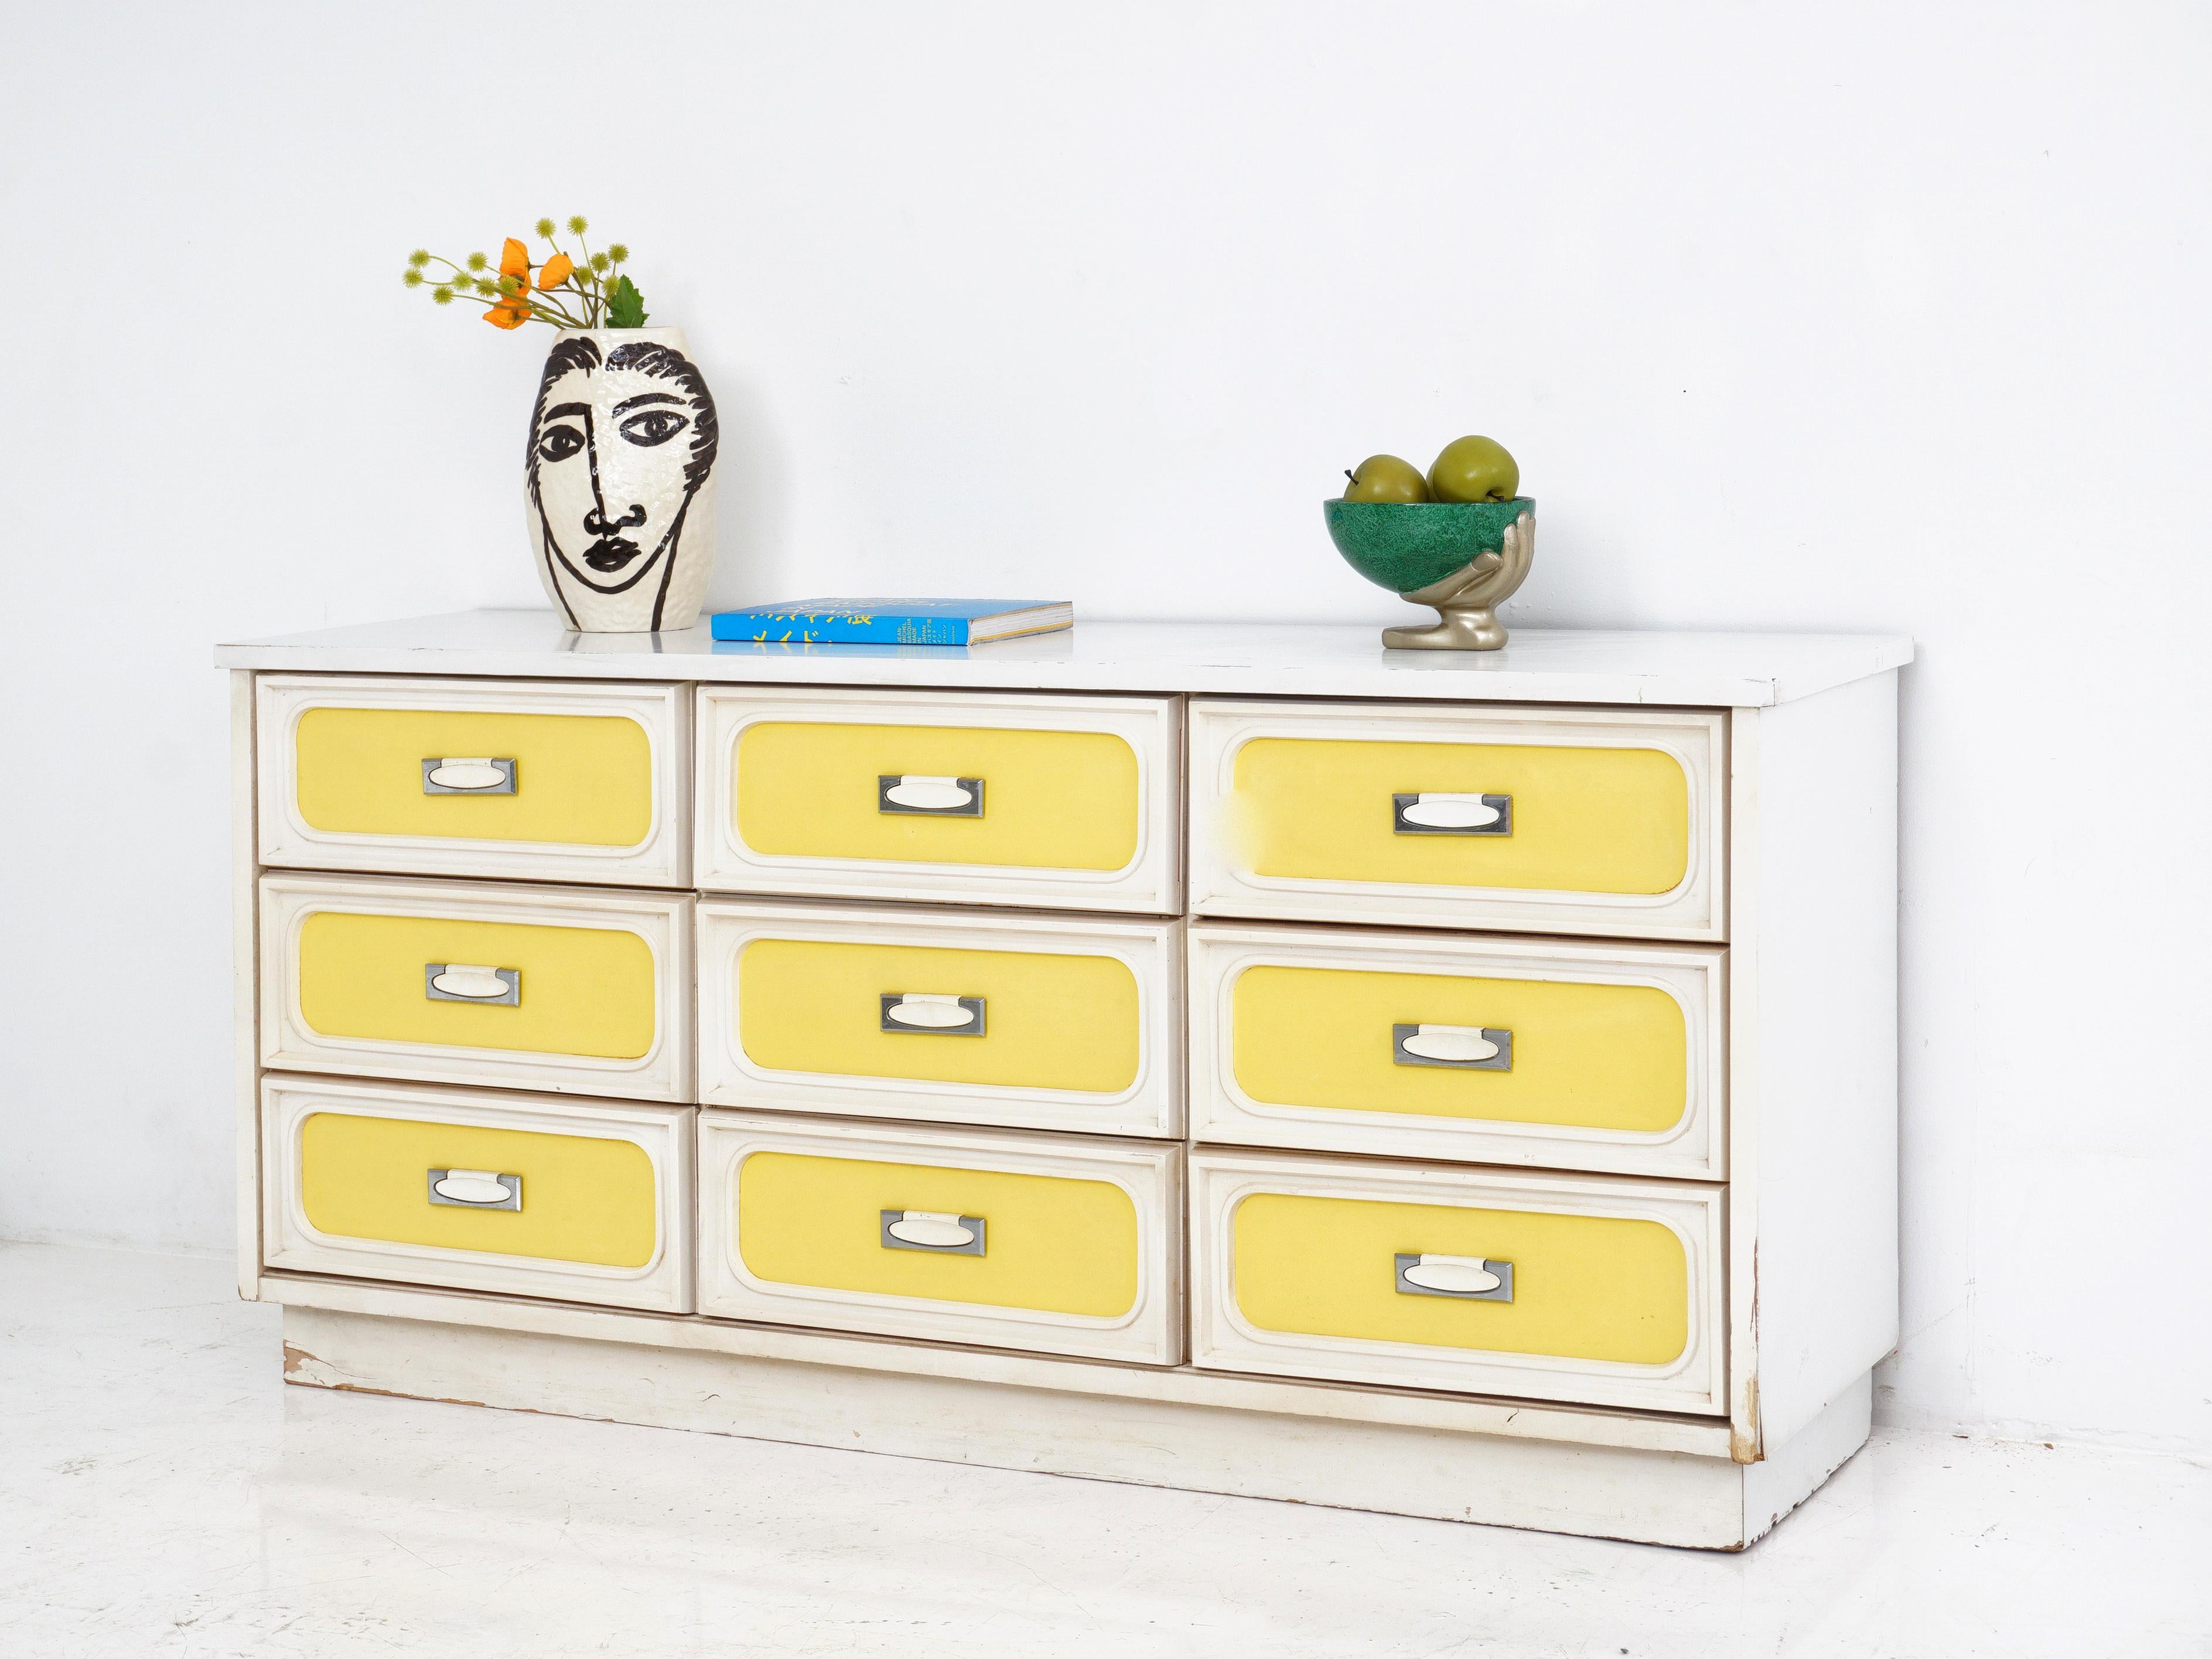 Get the best of both worlds with the Reversible Space Age Formica Dresser. With its vibrant yellow and green laminate drawer plates, you can switch up the colors to match your mood or decor, adding a playful and versatile touch to your space.

-